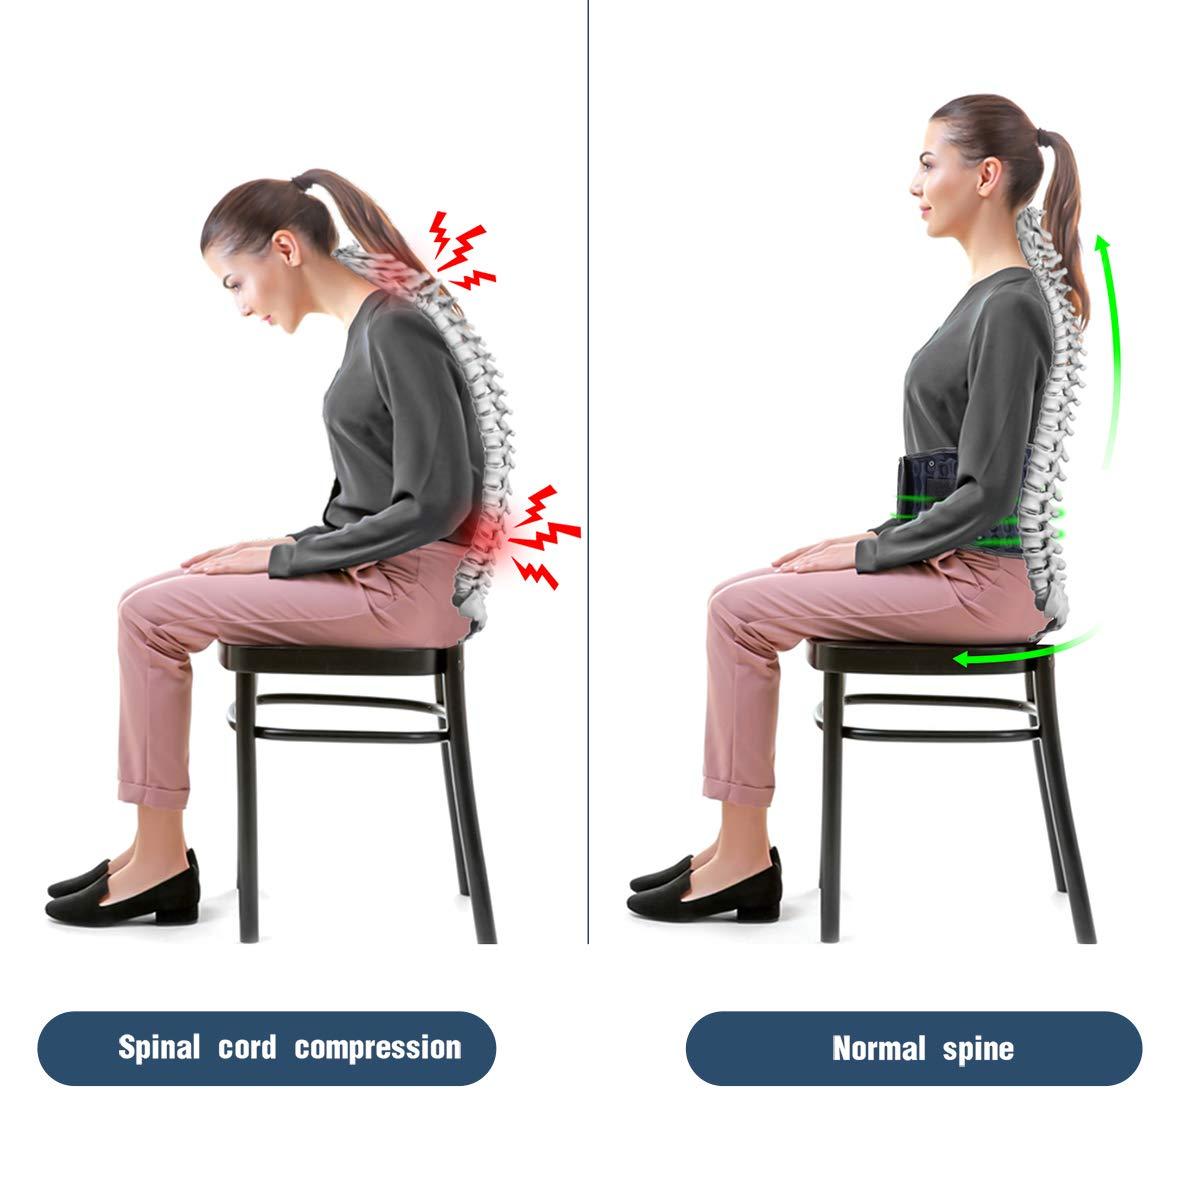 Ultimate Back Support - Full Spine Relief For Sitting